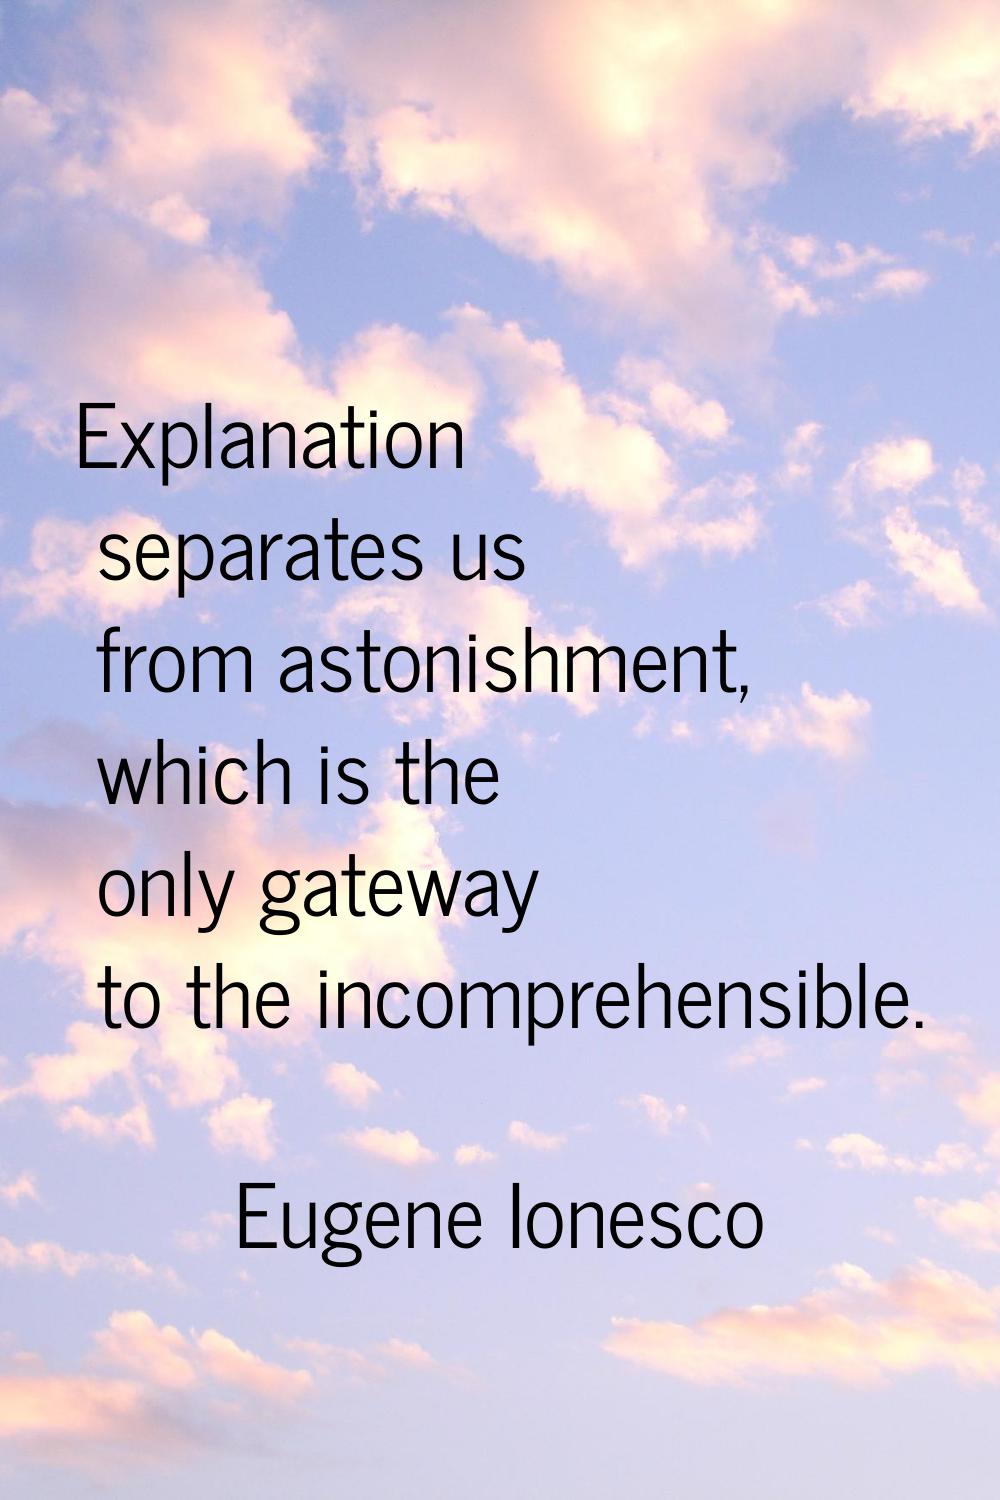 Explanation separates us from astonishment, which is the only gateway to the incomprehensible.